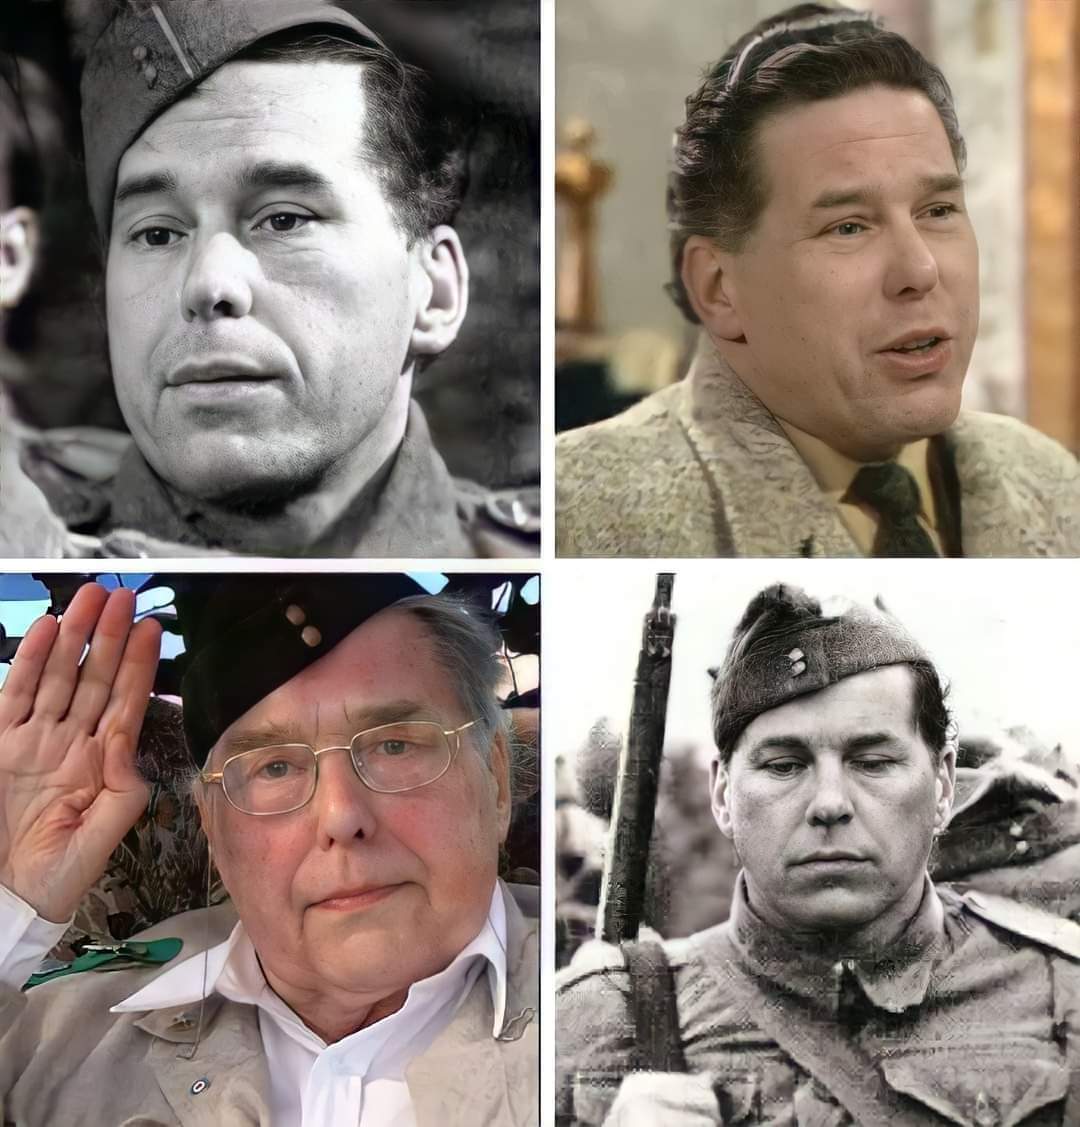 Remembering the late Actor, Colin Bean (15 April 1926 – 20 June 2009)